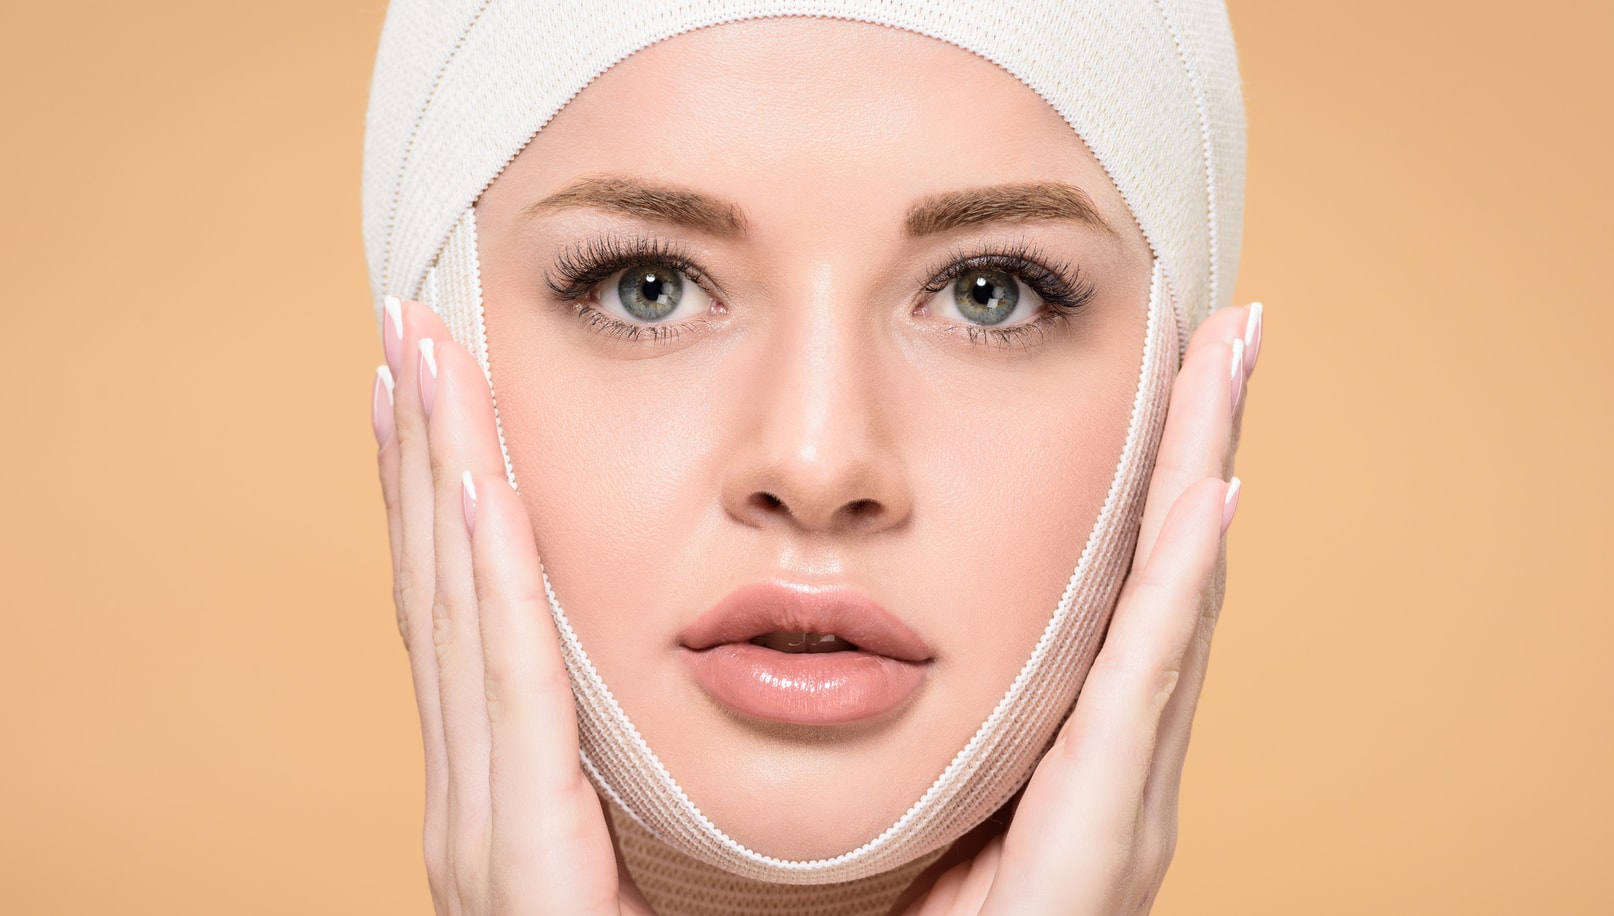 Stem Cell Facelifts